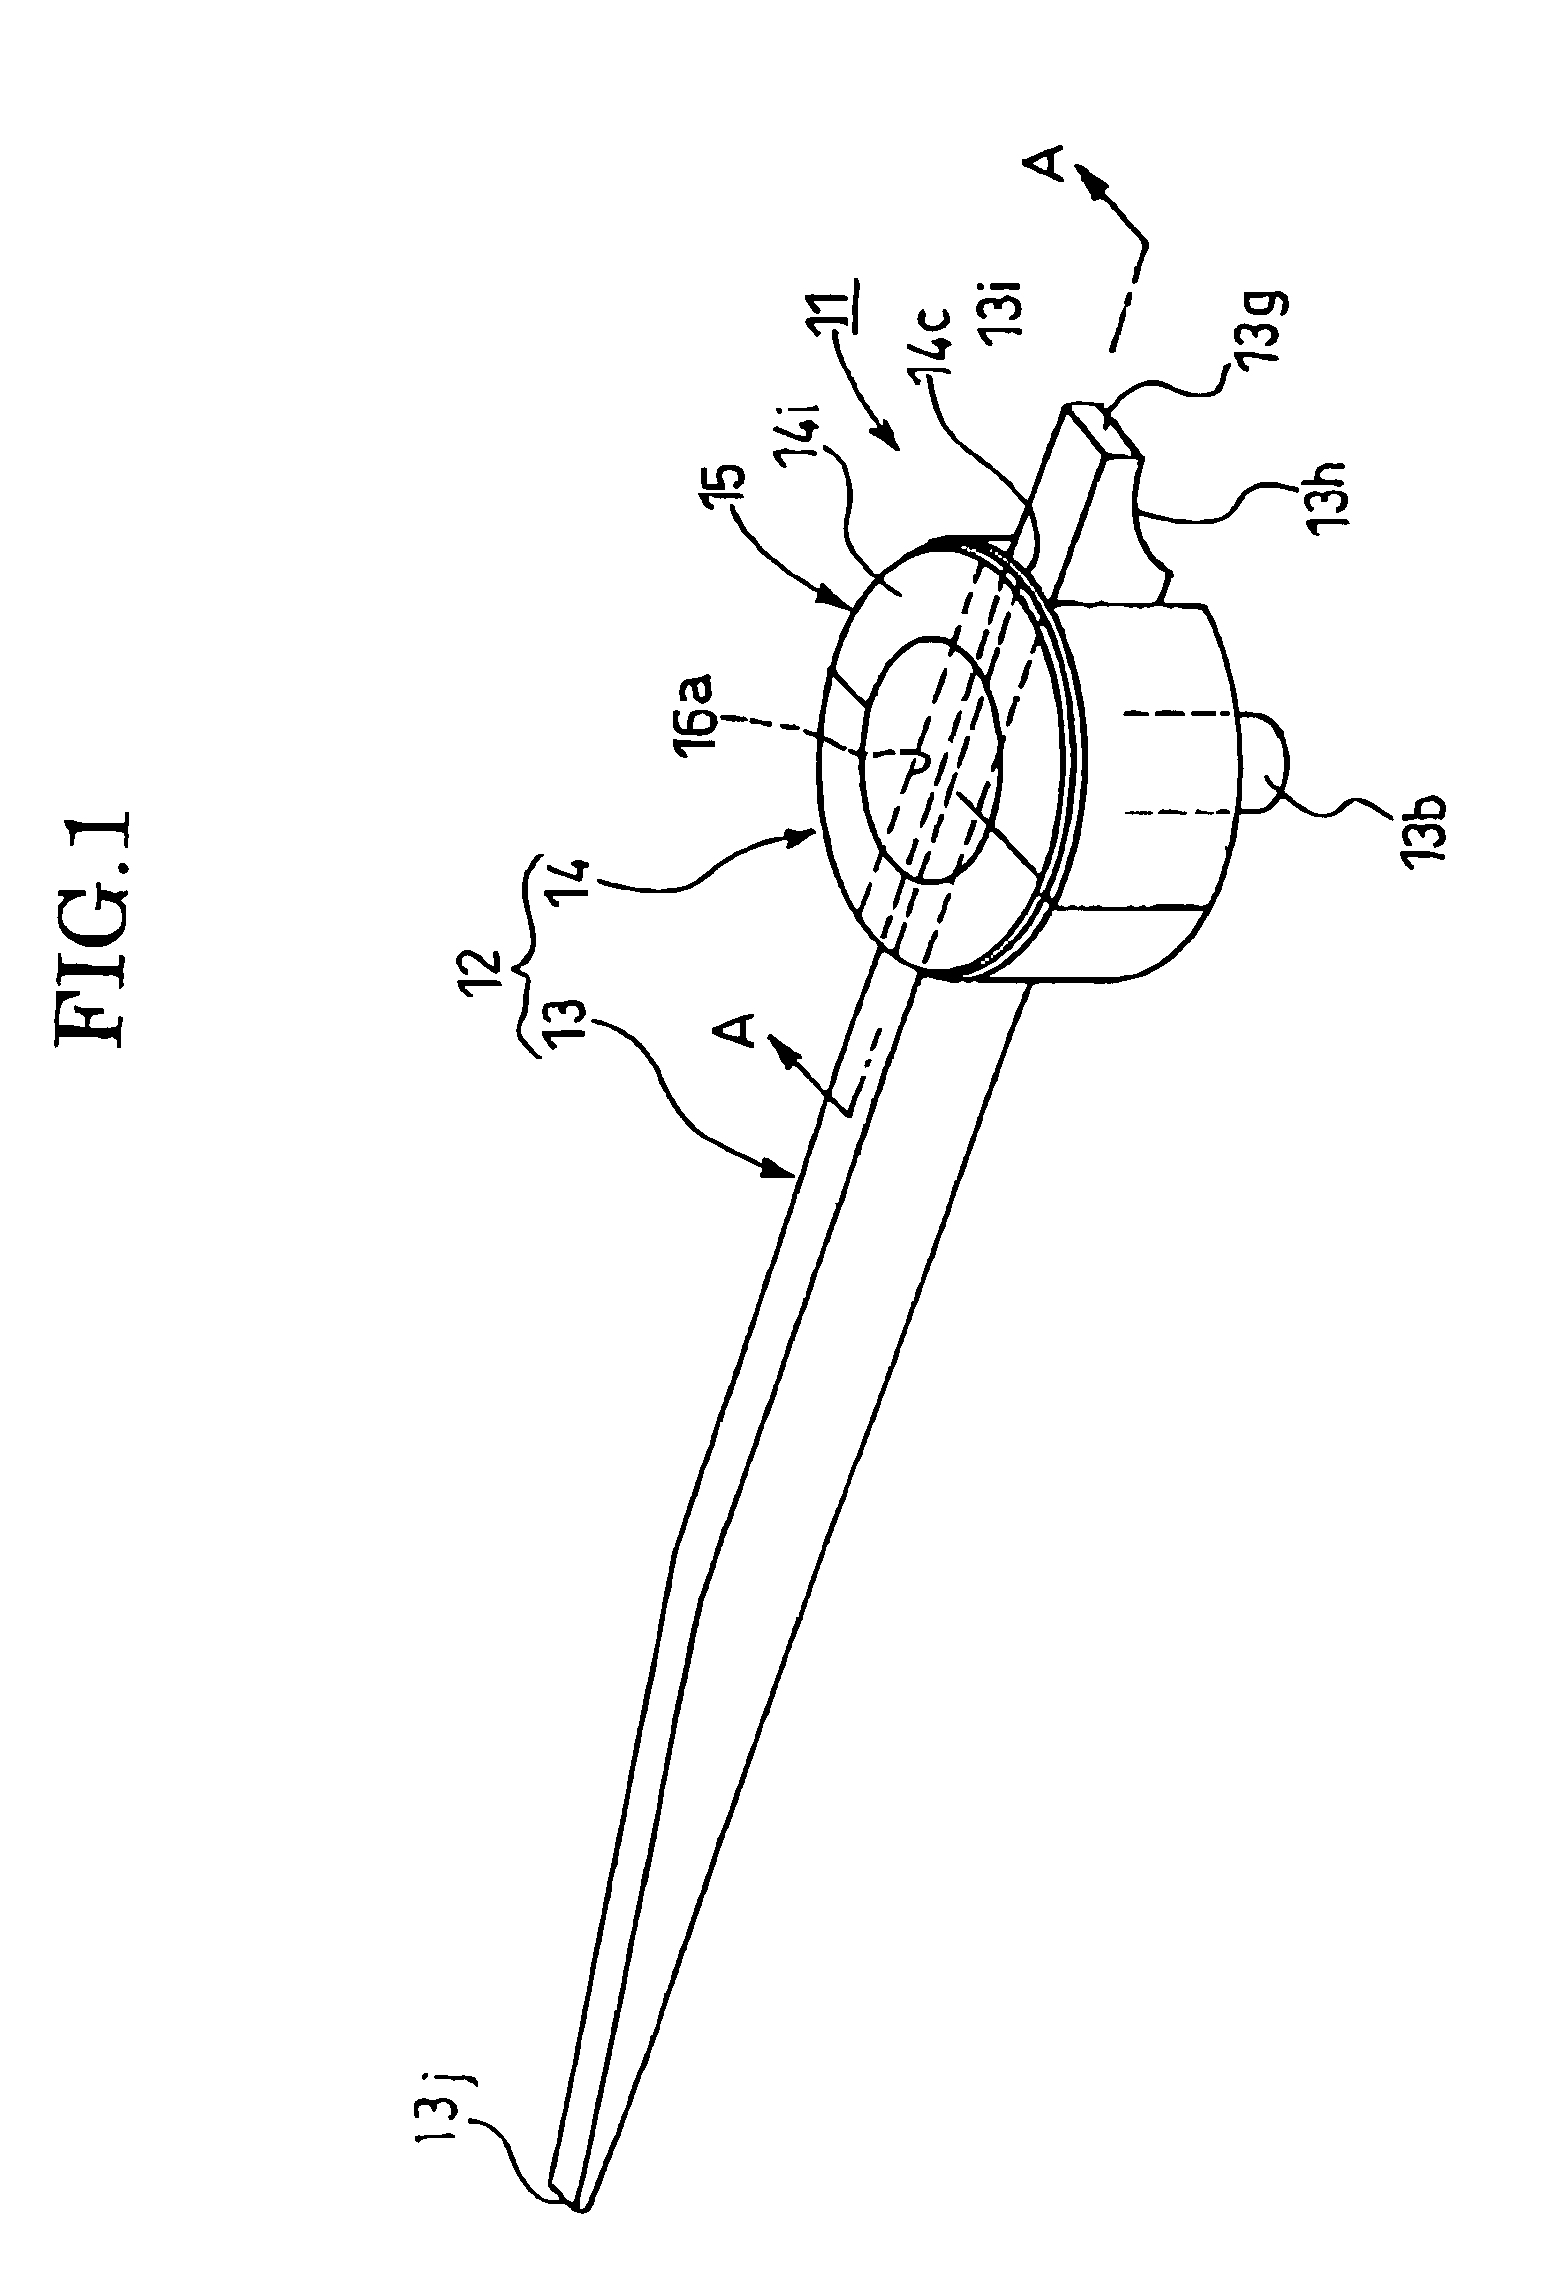 Structure for illuminating pointer of meter